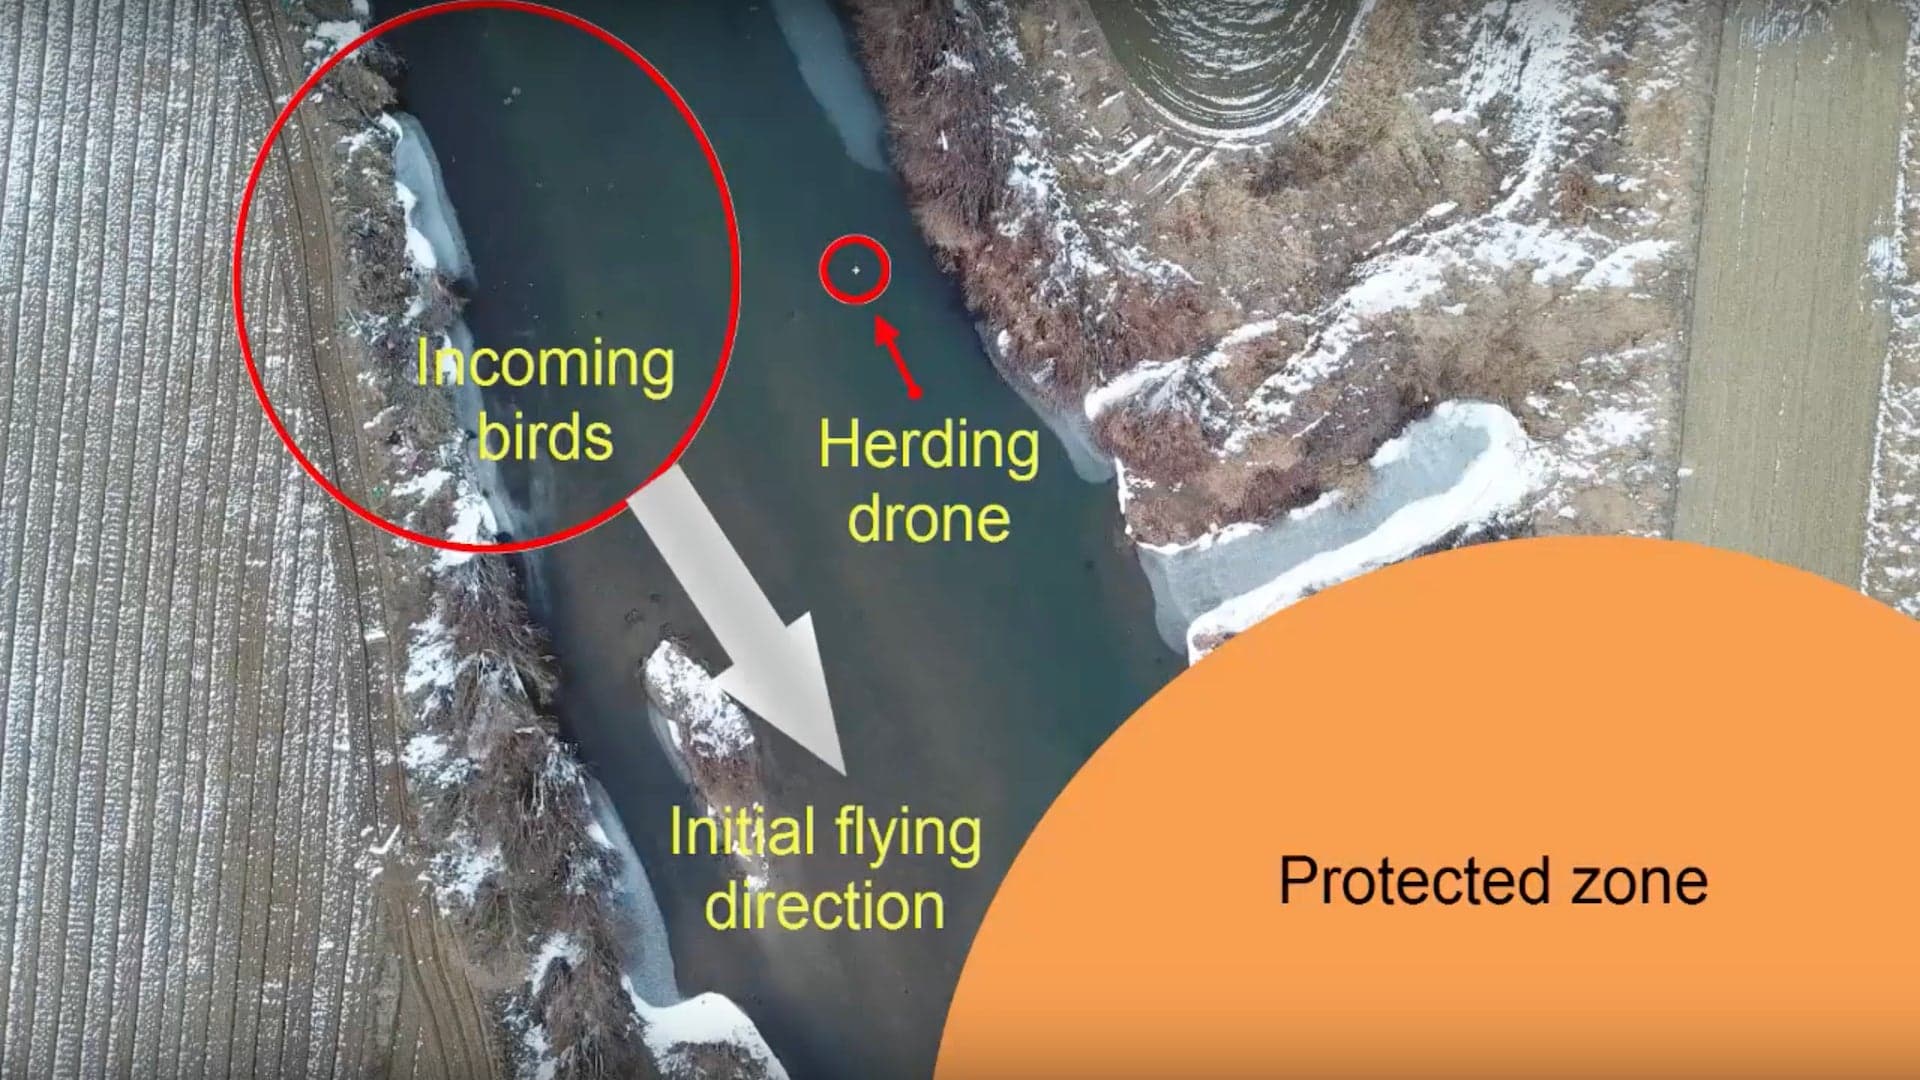 Caltech Develops Algorithm for Single Autonomous Drone to Herd Birds Away From Airports